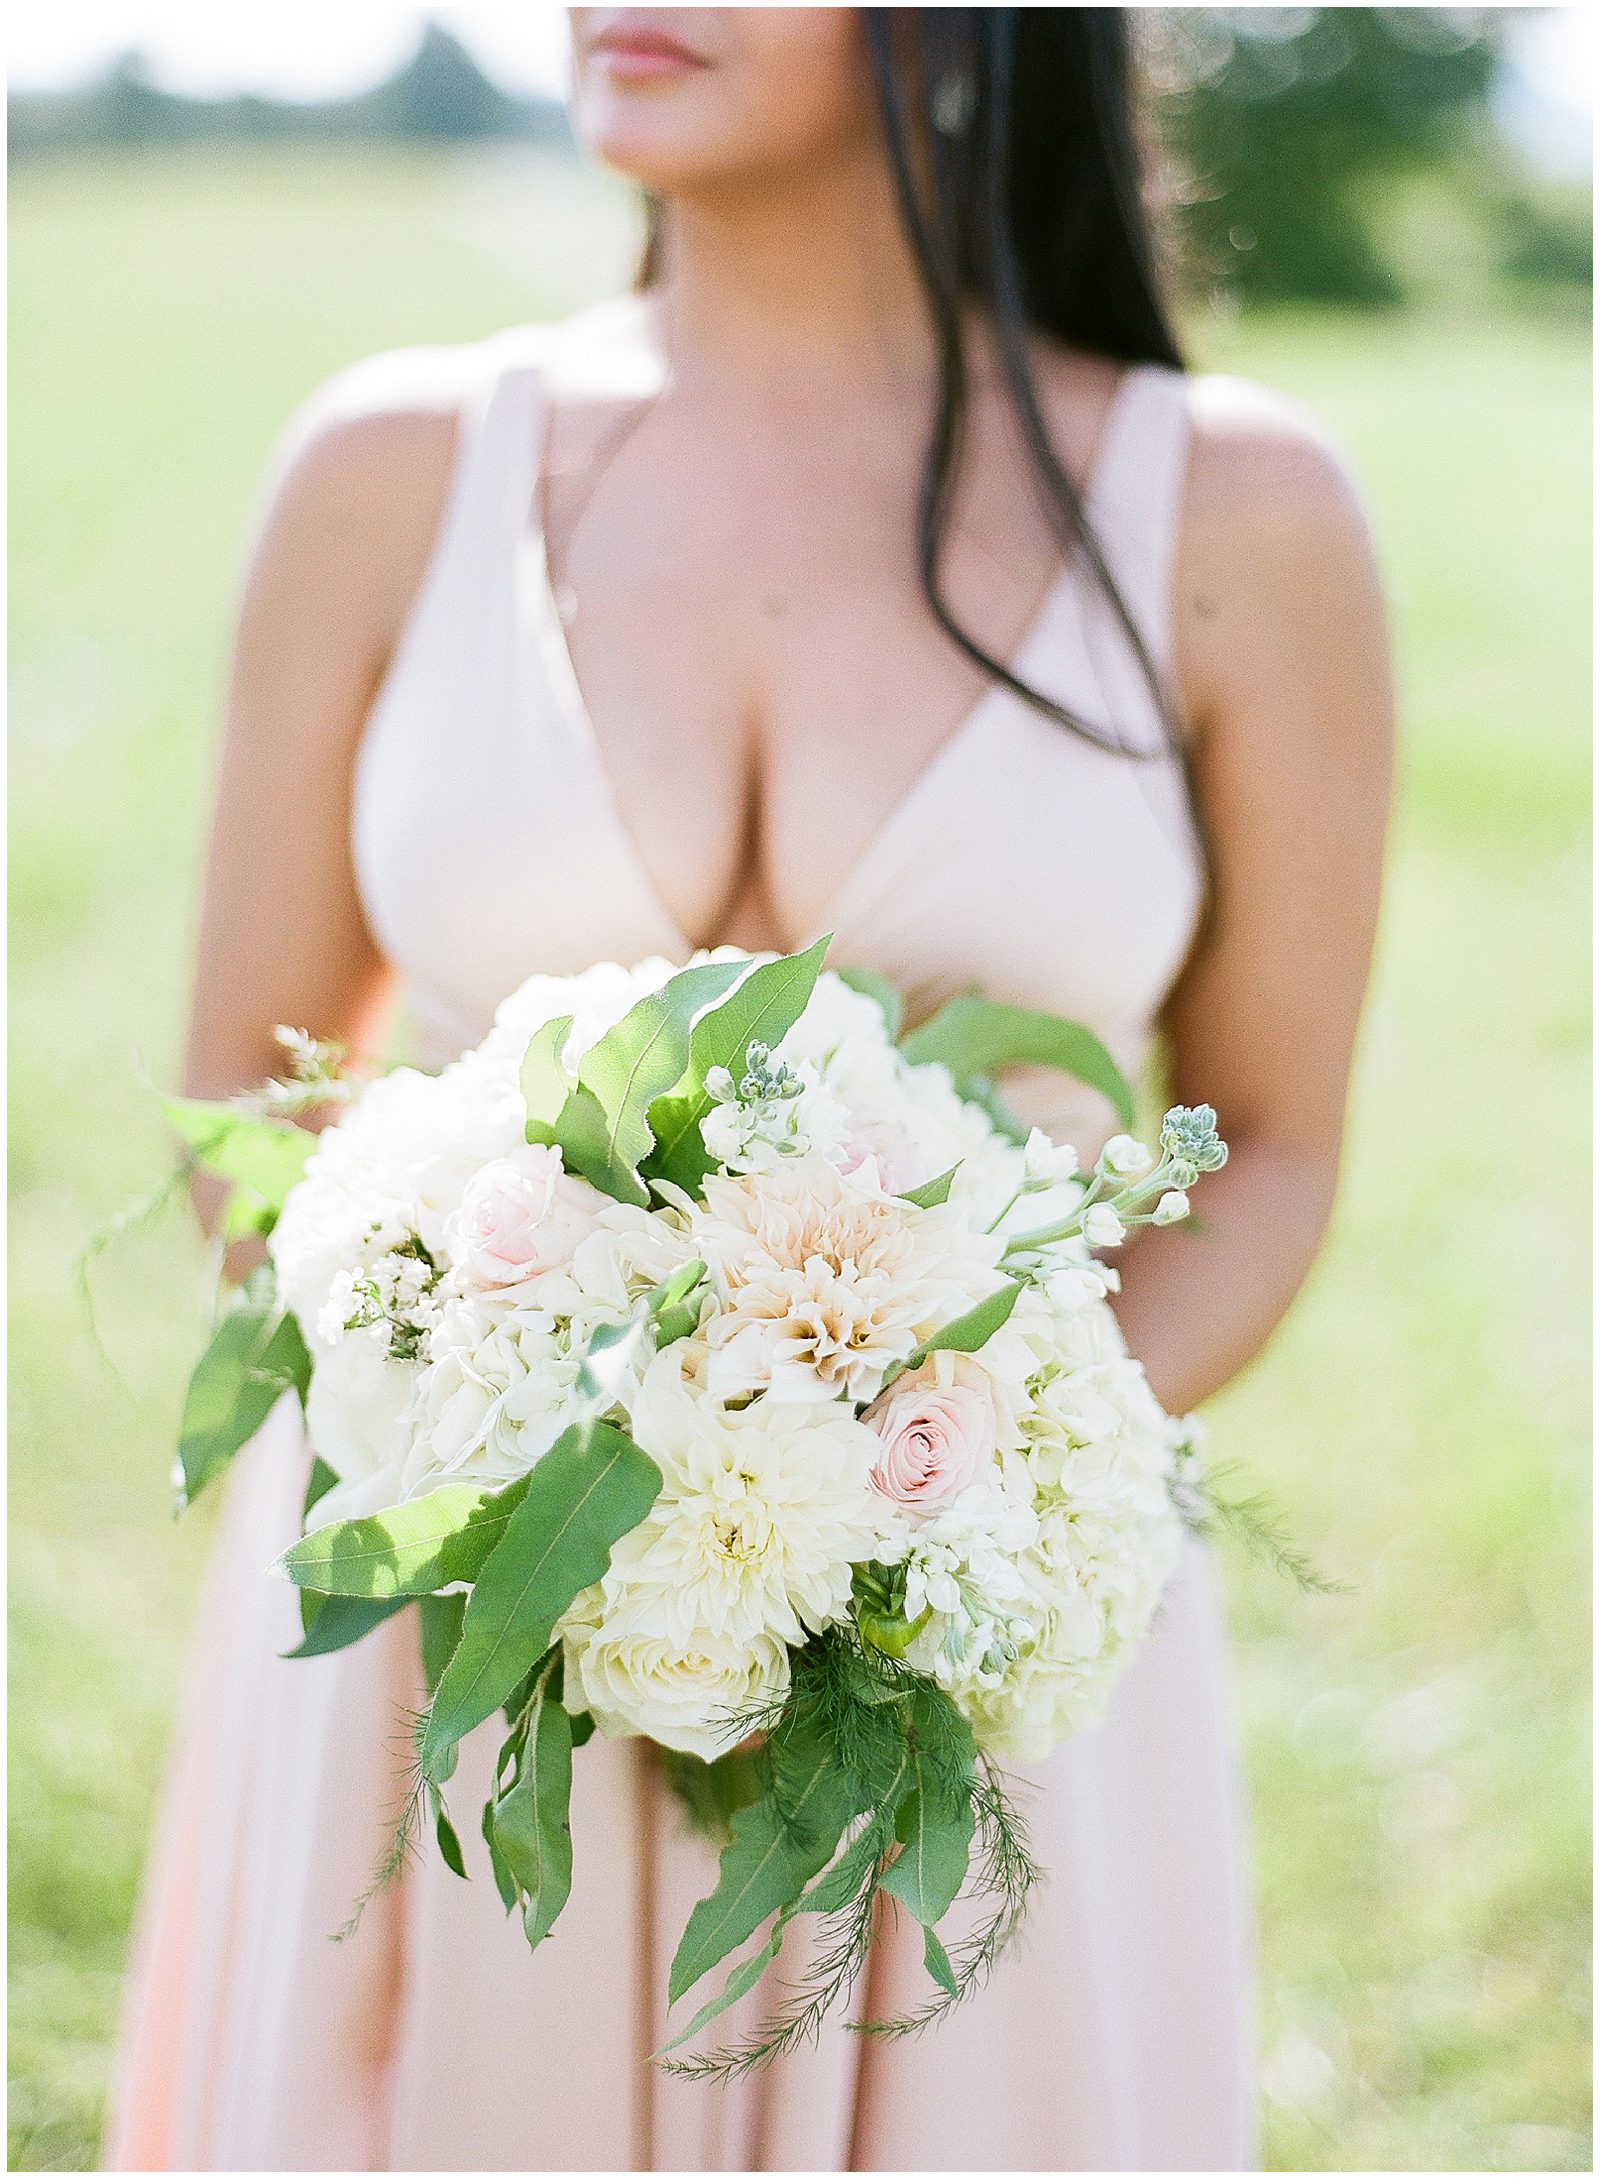 Maid of Honor Holding Bouquet Photo